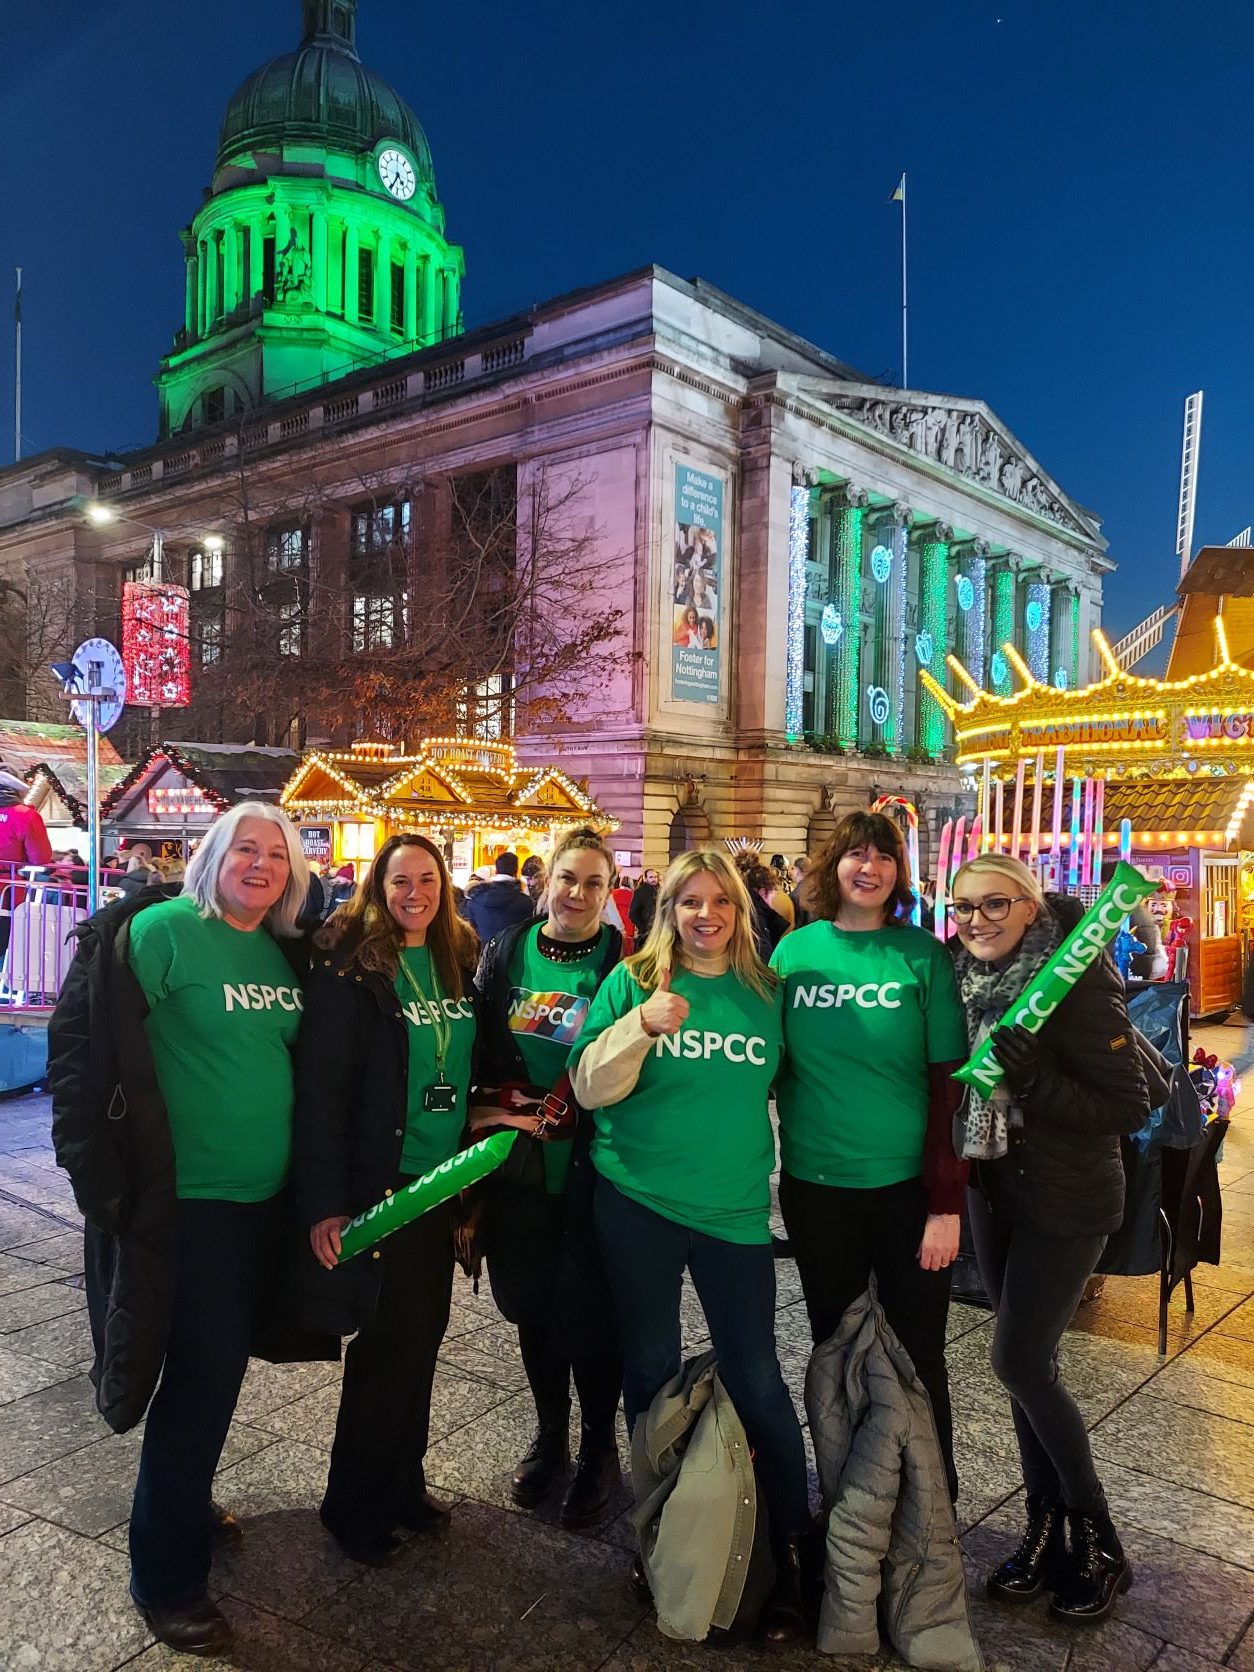 Group of people in NSPCC shirts outside Nottingham Council House 2022